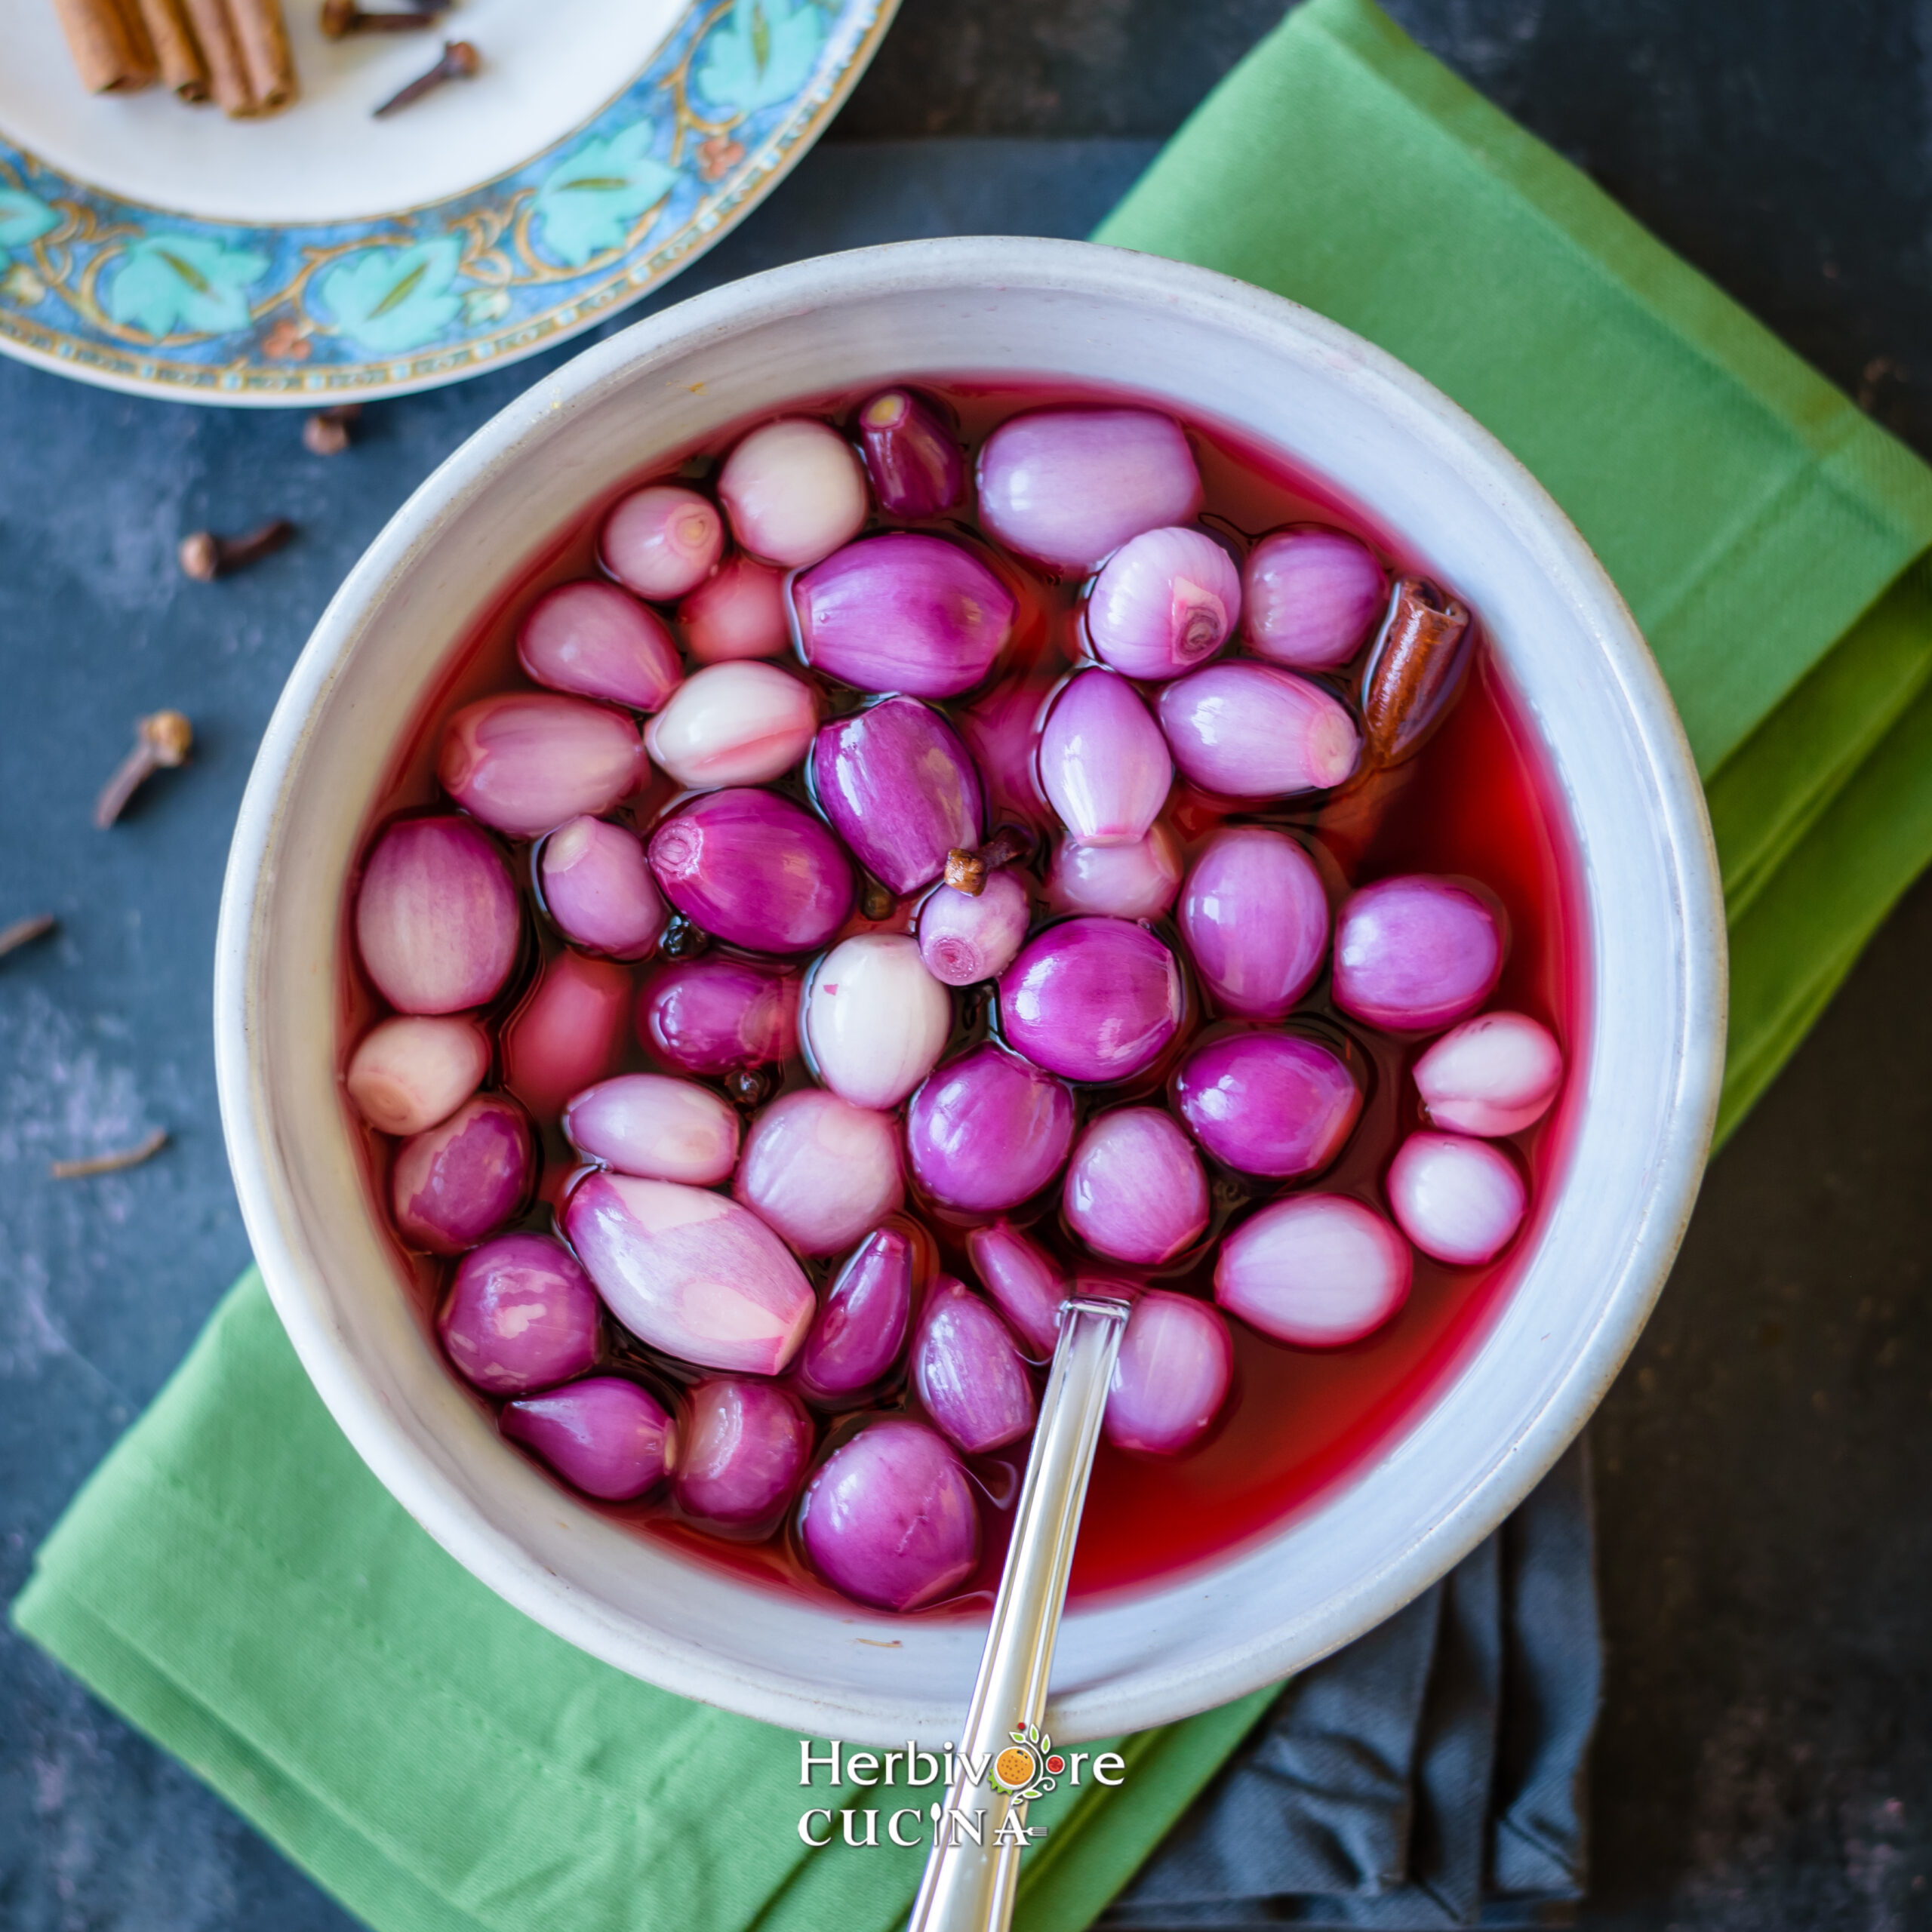 Pickled Onions in beetroot brine in a gray bowl placed on a board with green napkin below it. 